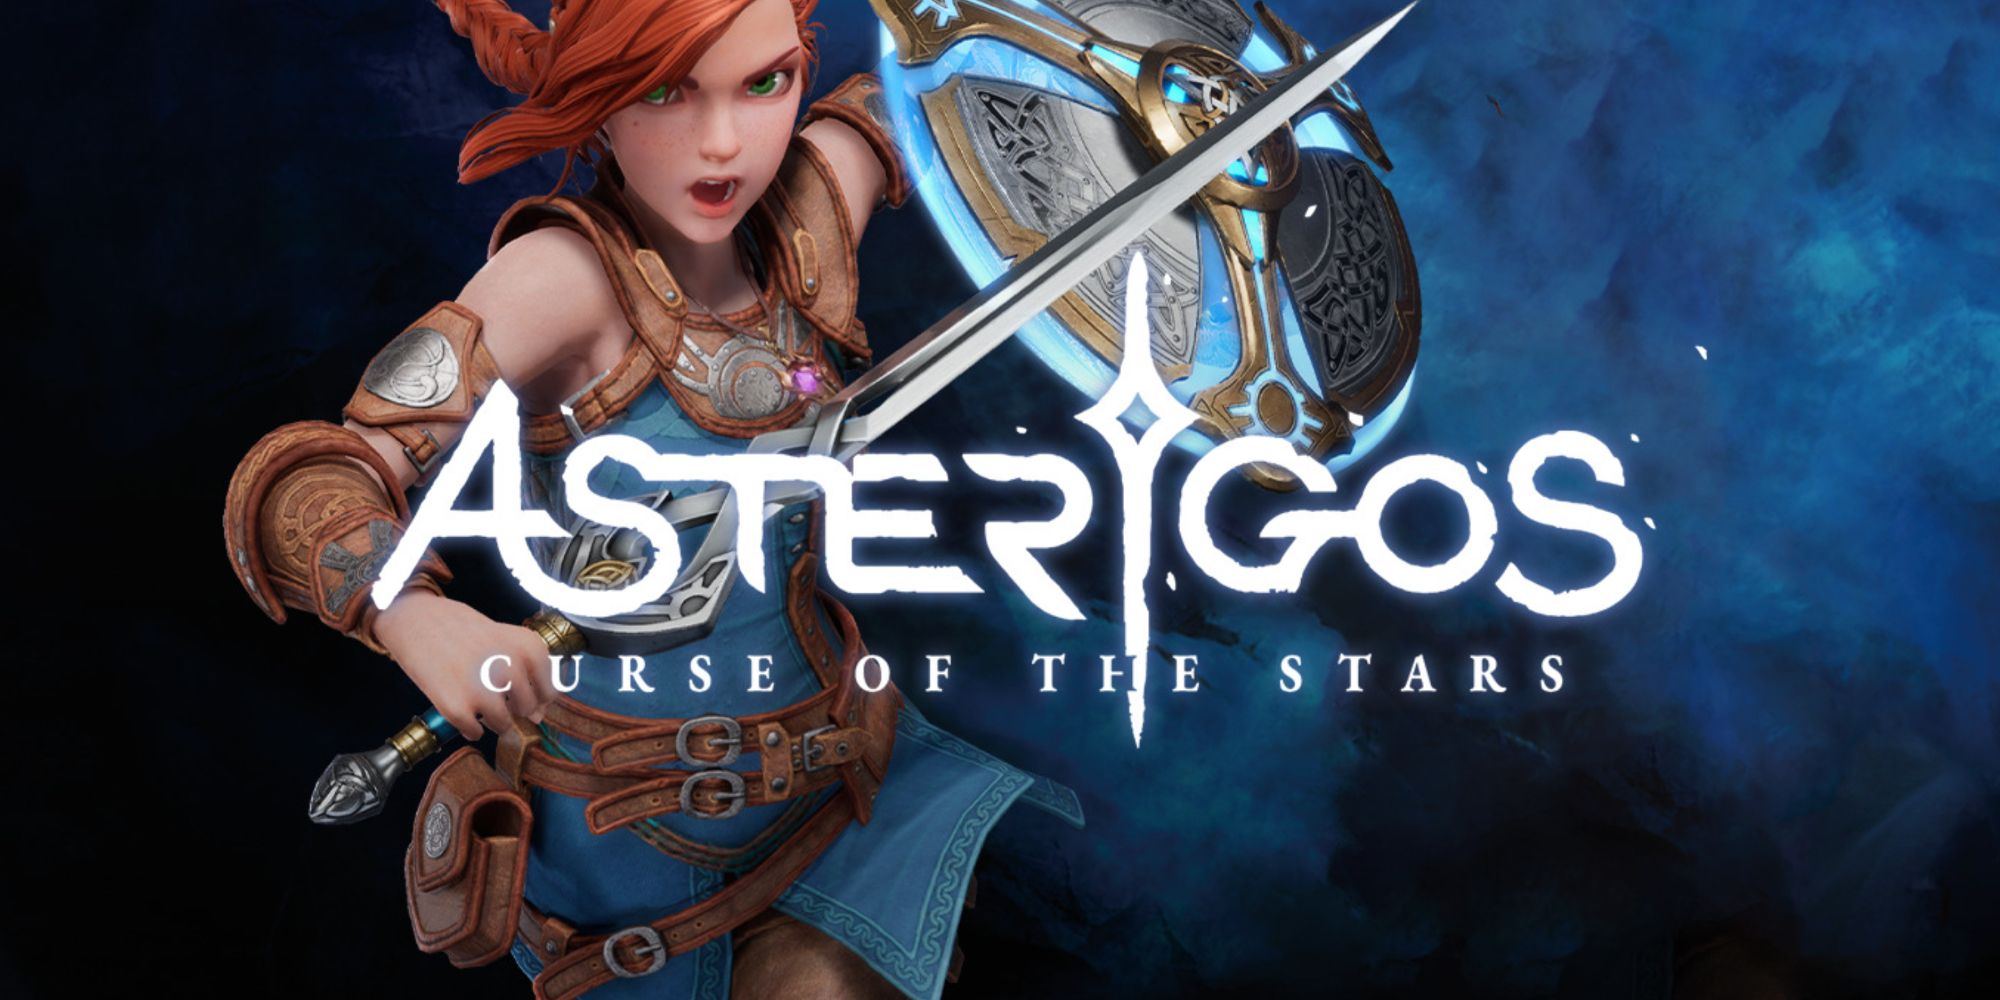 Core art for Asterigos Curse of the Stars